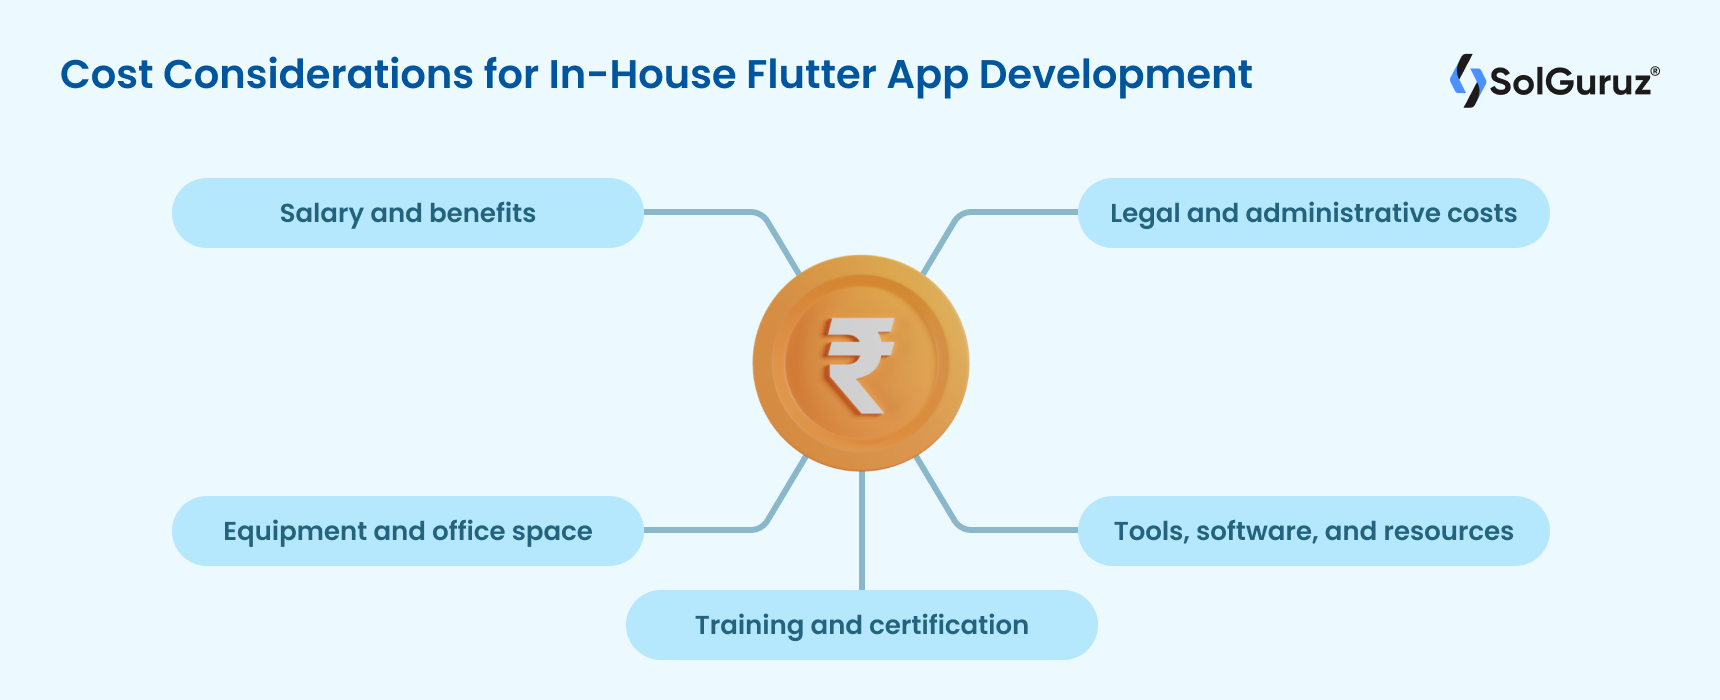 Cost Considerations for In-House Flutter App Development